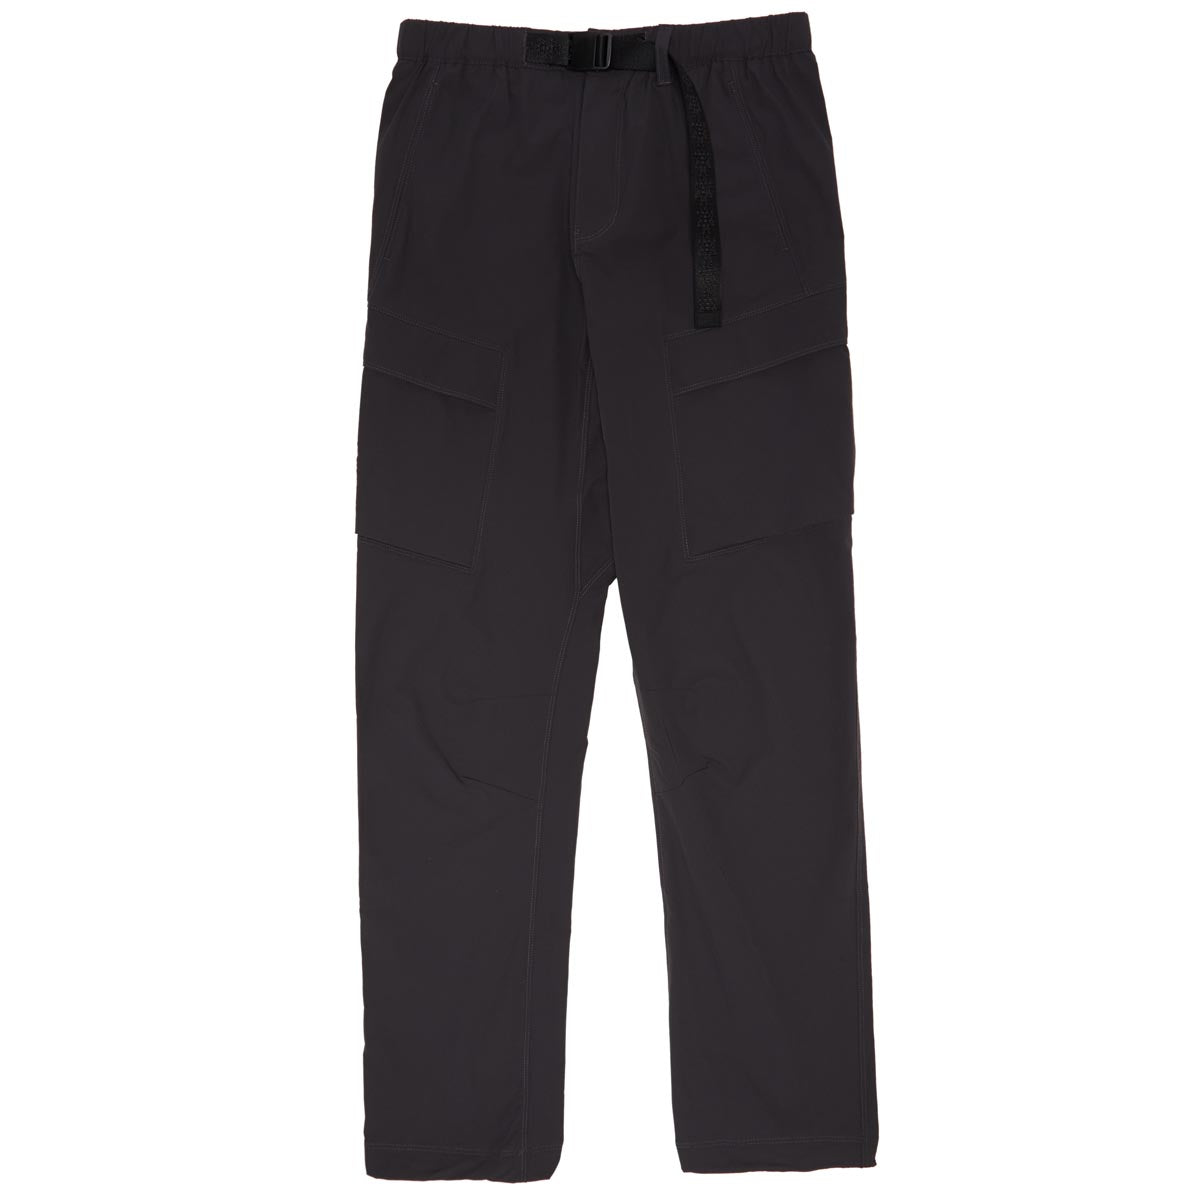 Kennedy The Ascension Cargo Pants - Charcoal image 1